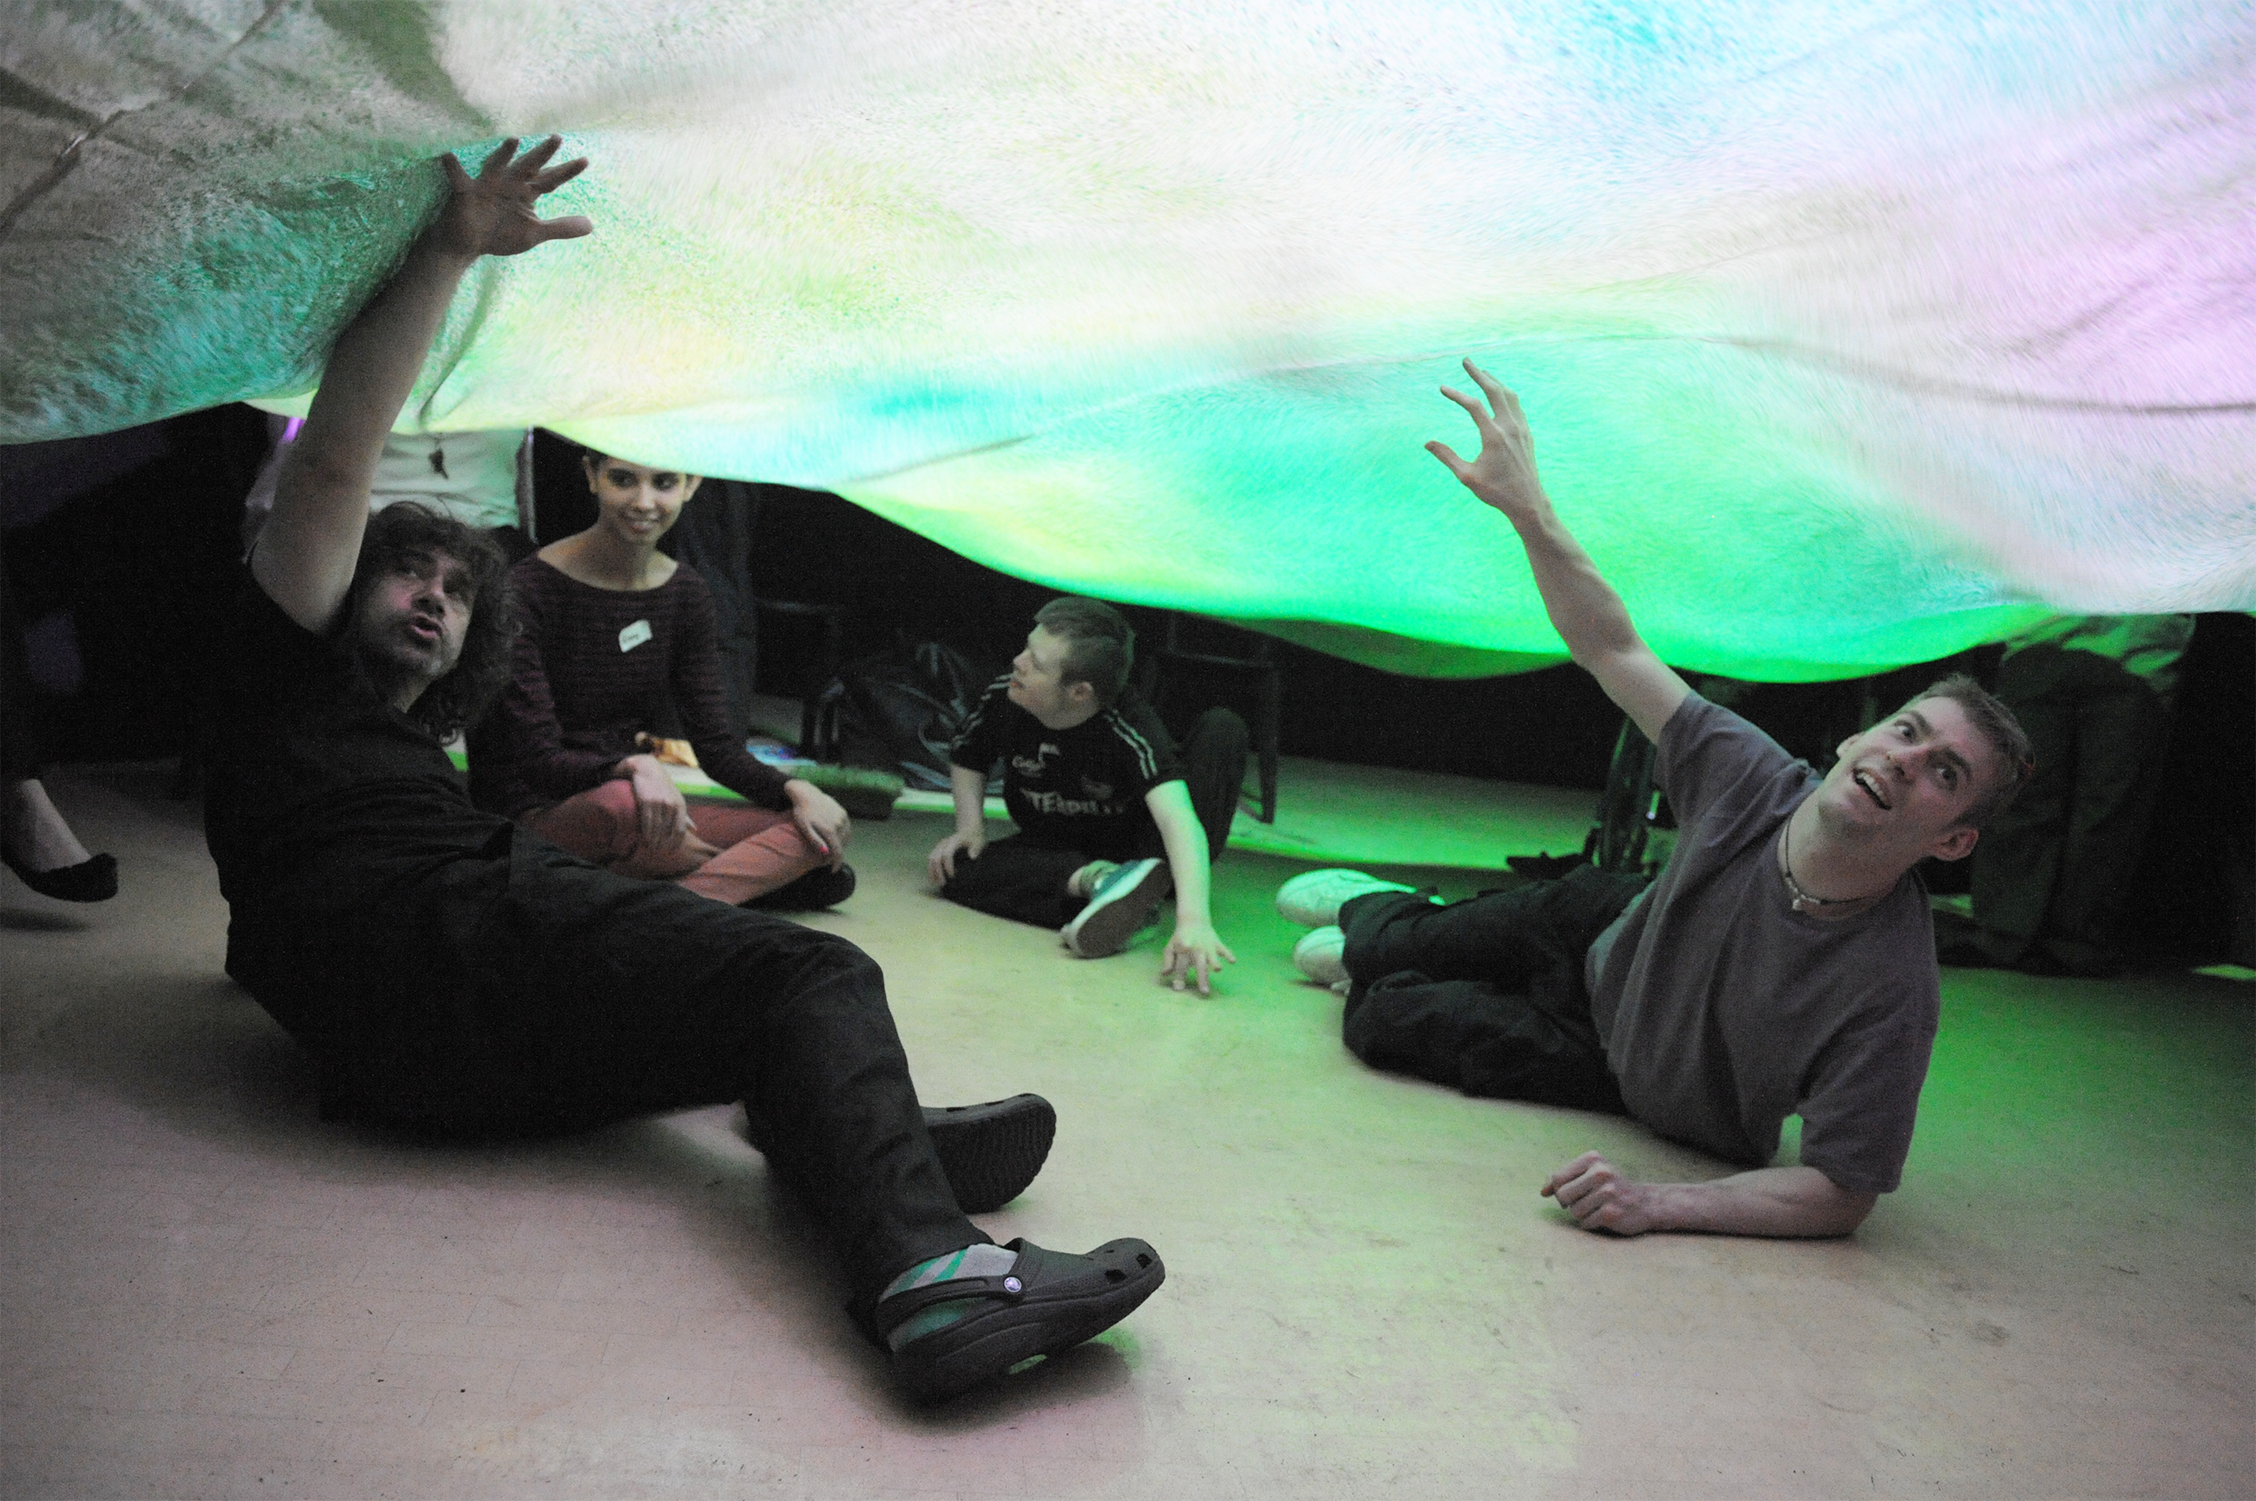 Interacting with a tree canopy: development work on White Peacock, produced by Nottingham Playhouse, with our potential audience members. Performers Matt Marks on the left and Dan Edge on the right.